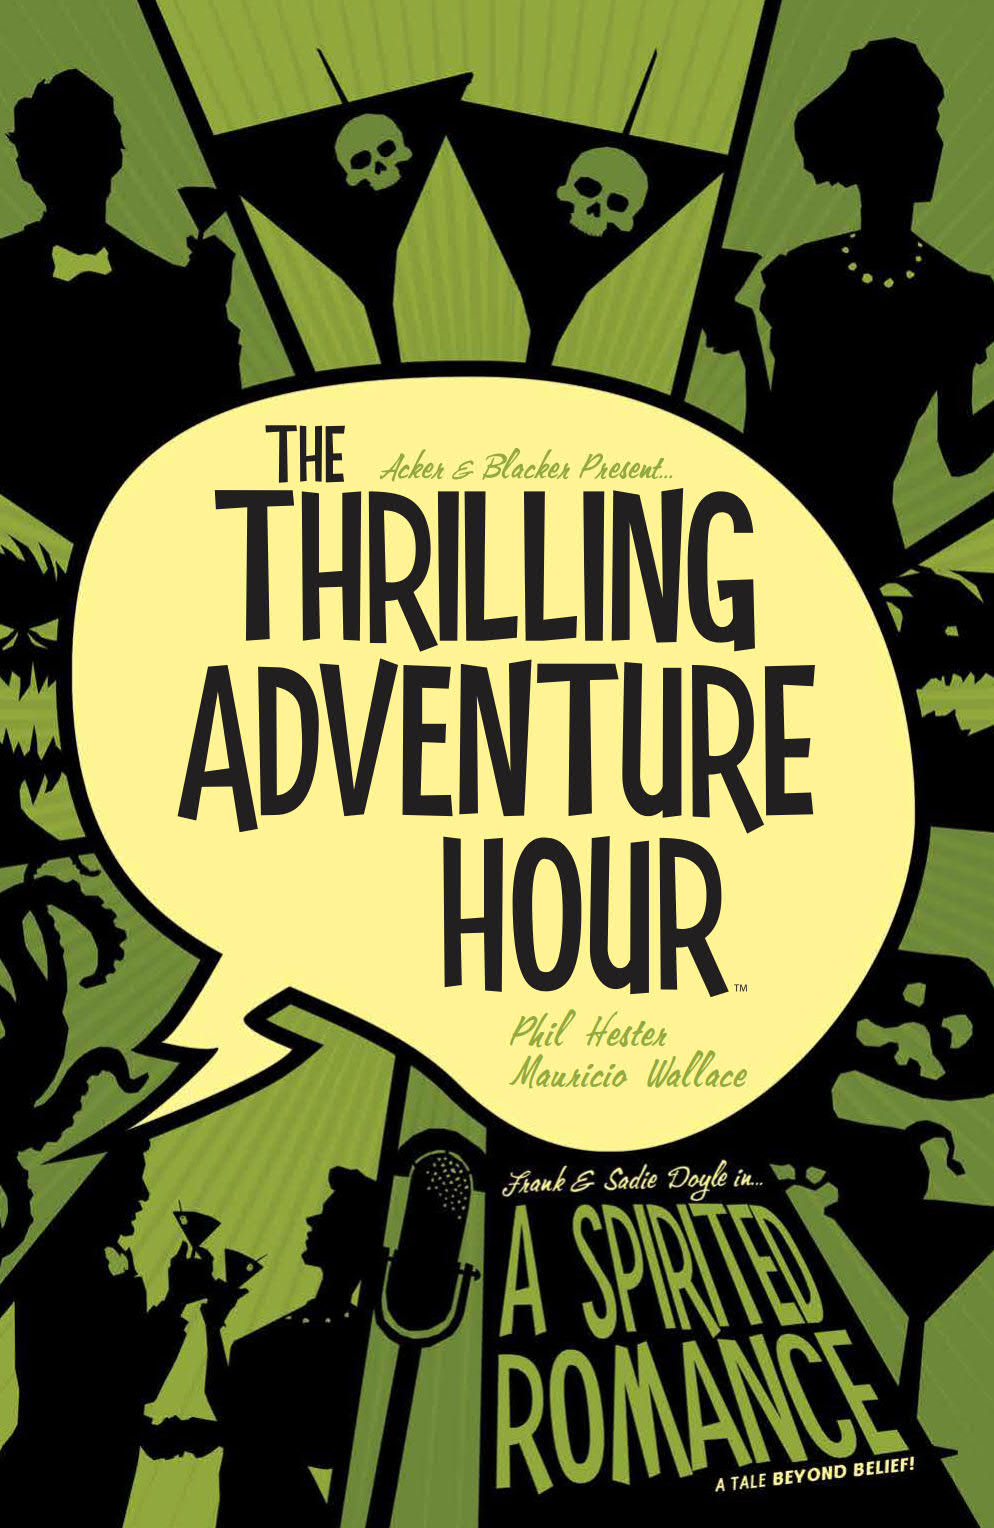 Thrilling Adventure Hour: A Spirited Romance review